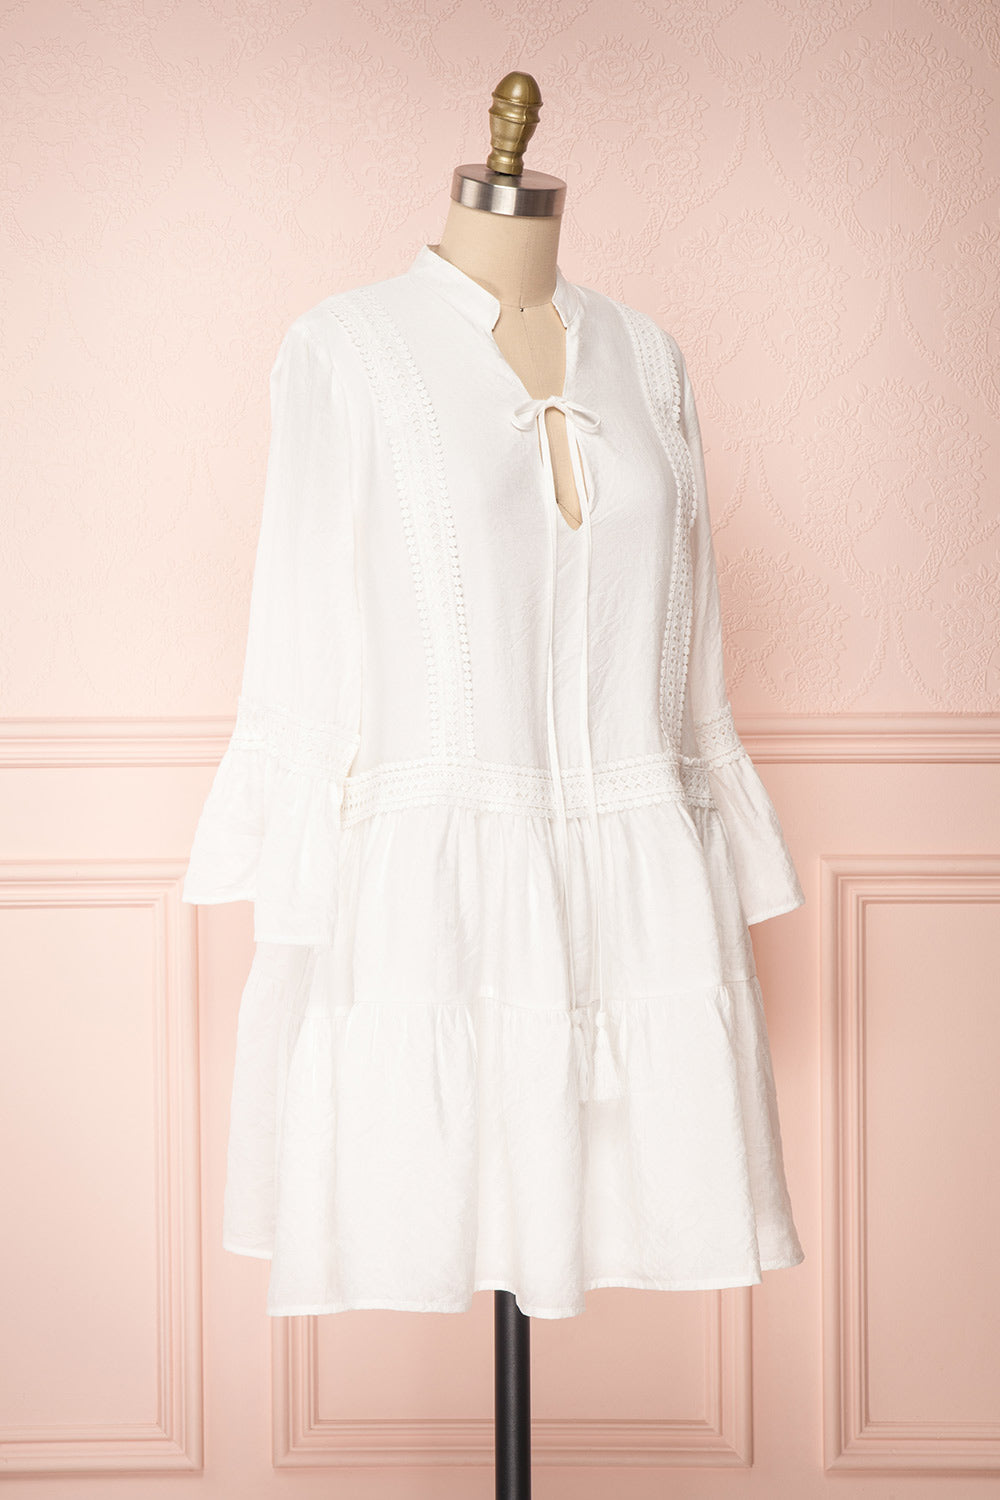 Makanui White Tunic Dress with Bell Sleeves | Boutique 1861